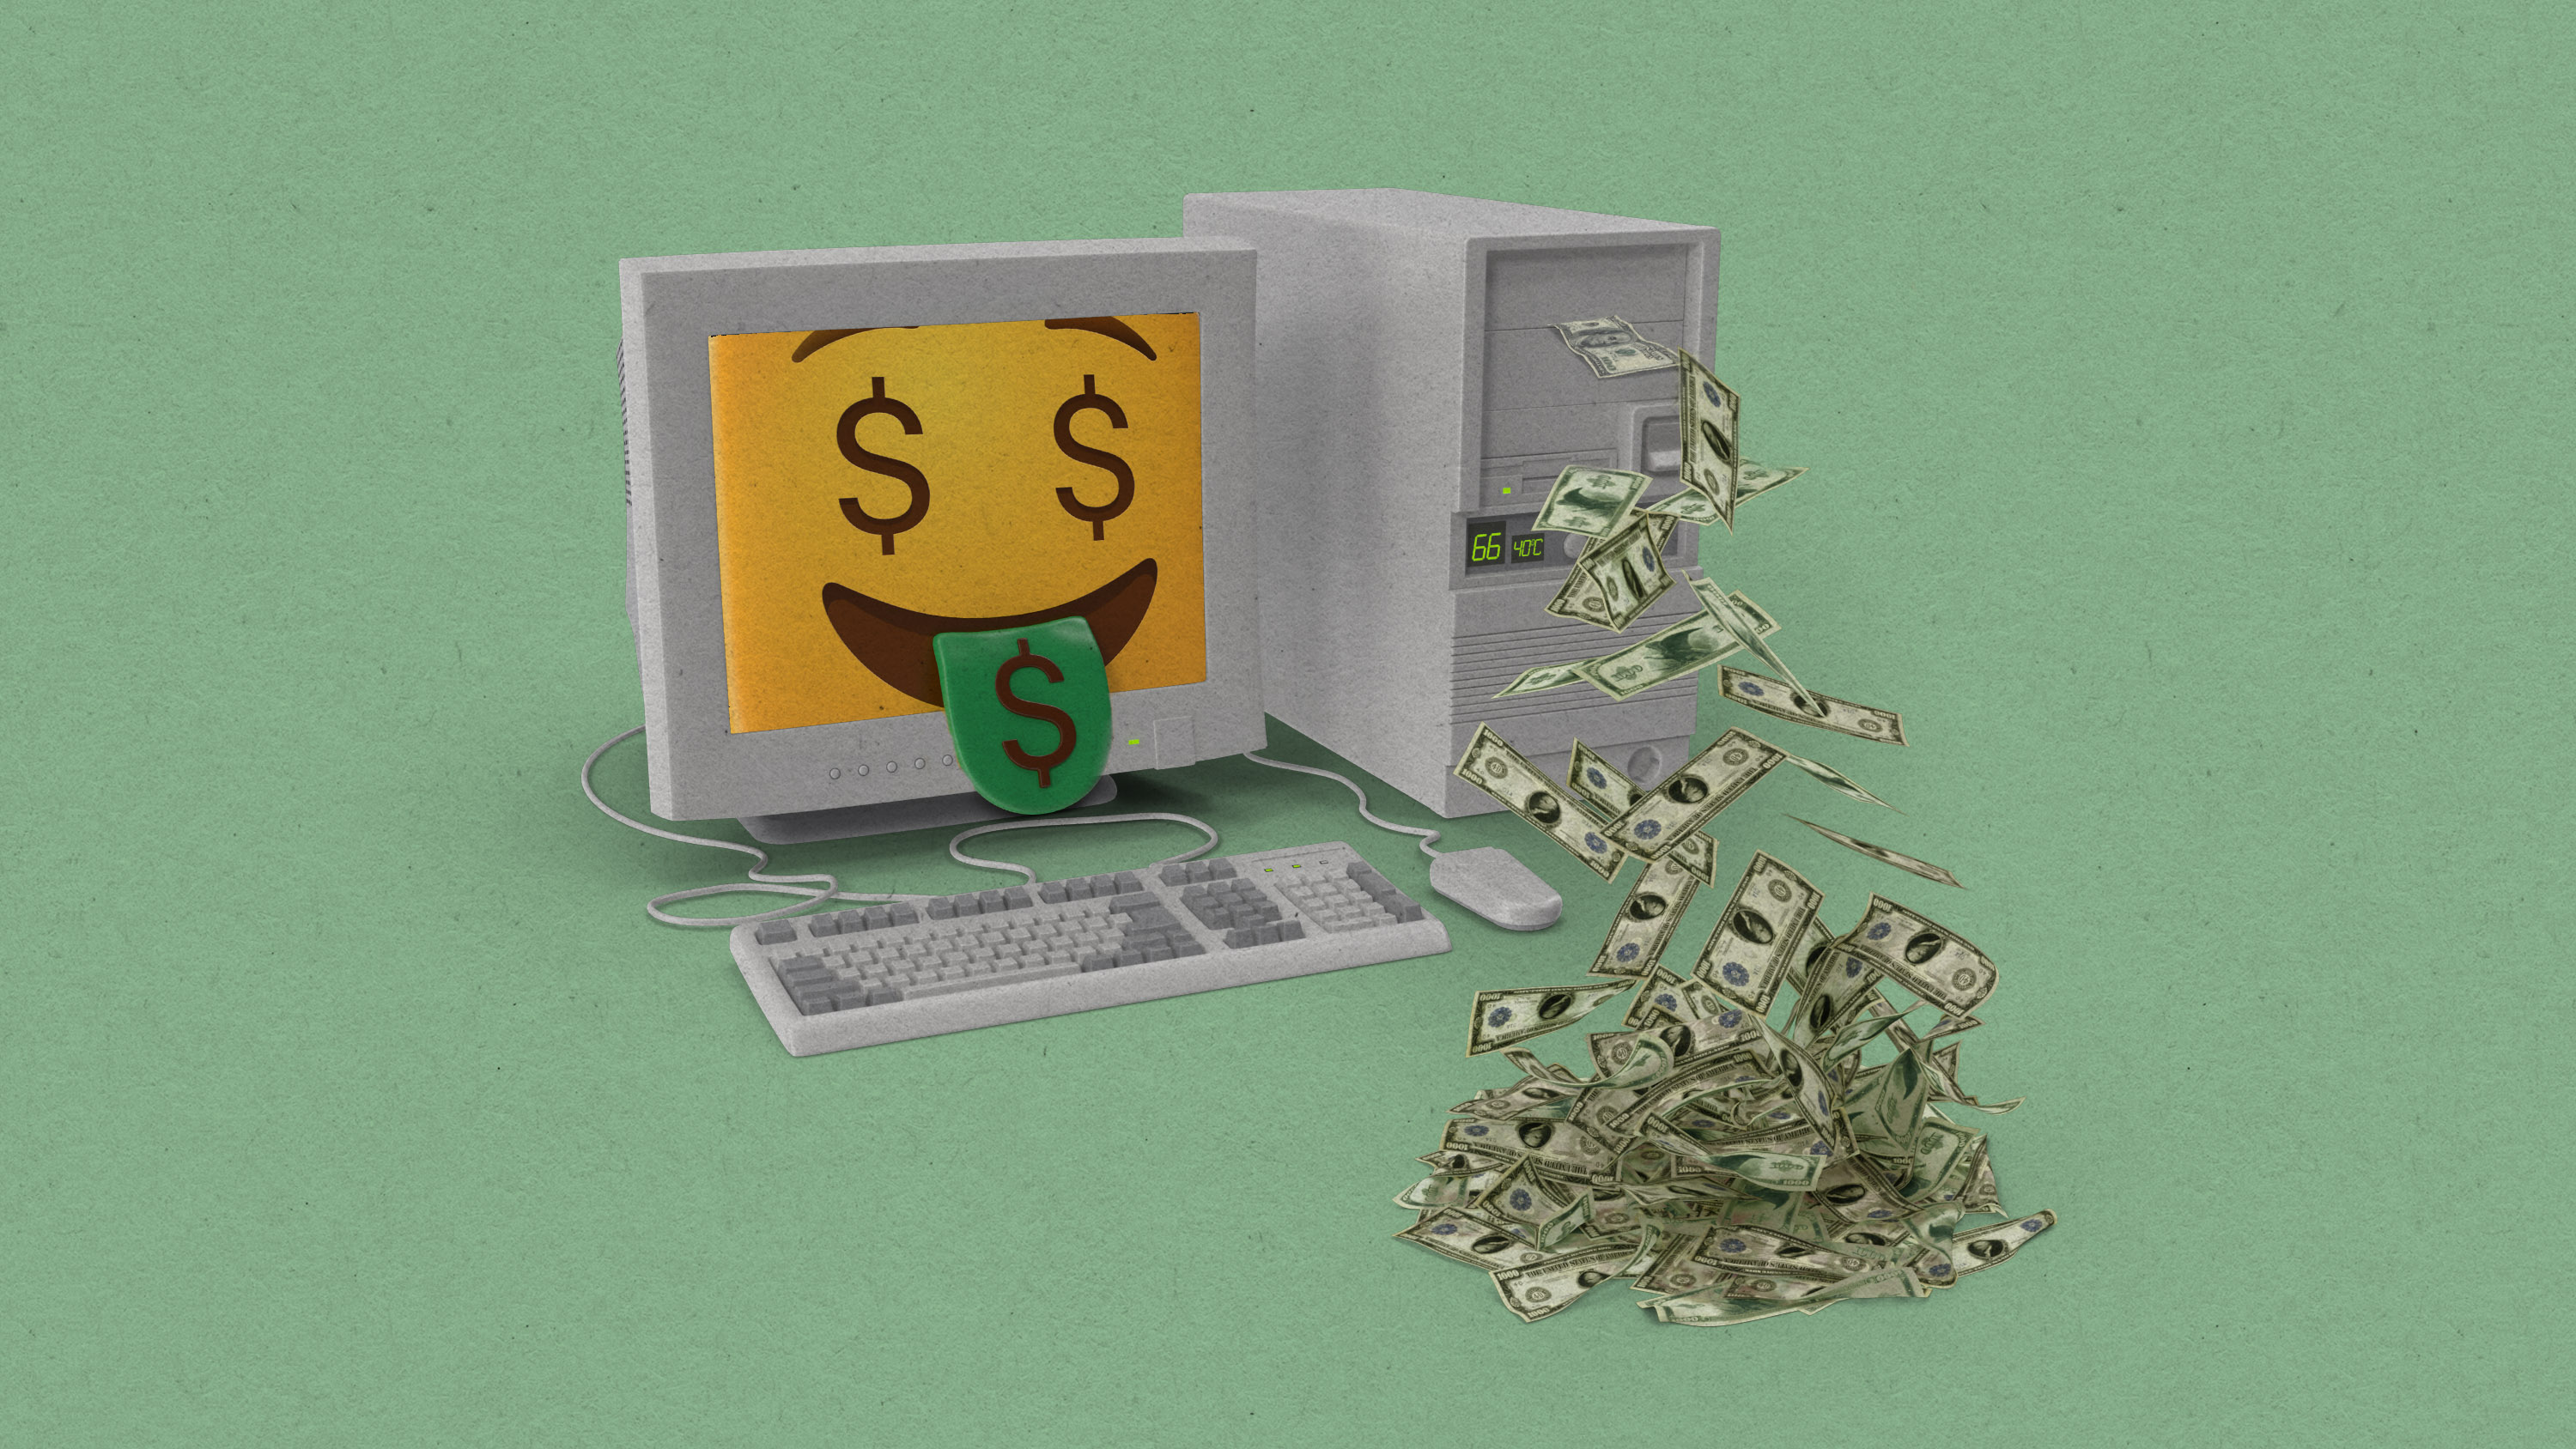 a desktop computer ejecting a pile of cash. the monitor display is filled with a yellow moneyface emoji with a green tongue sticking out into the real space.